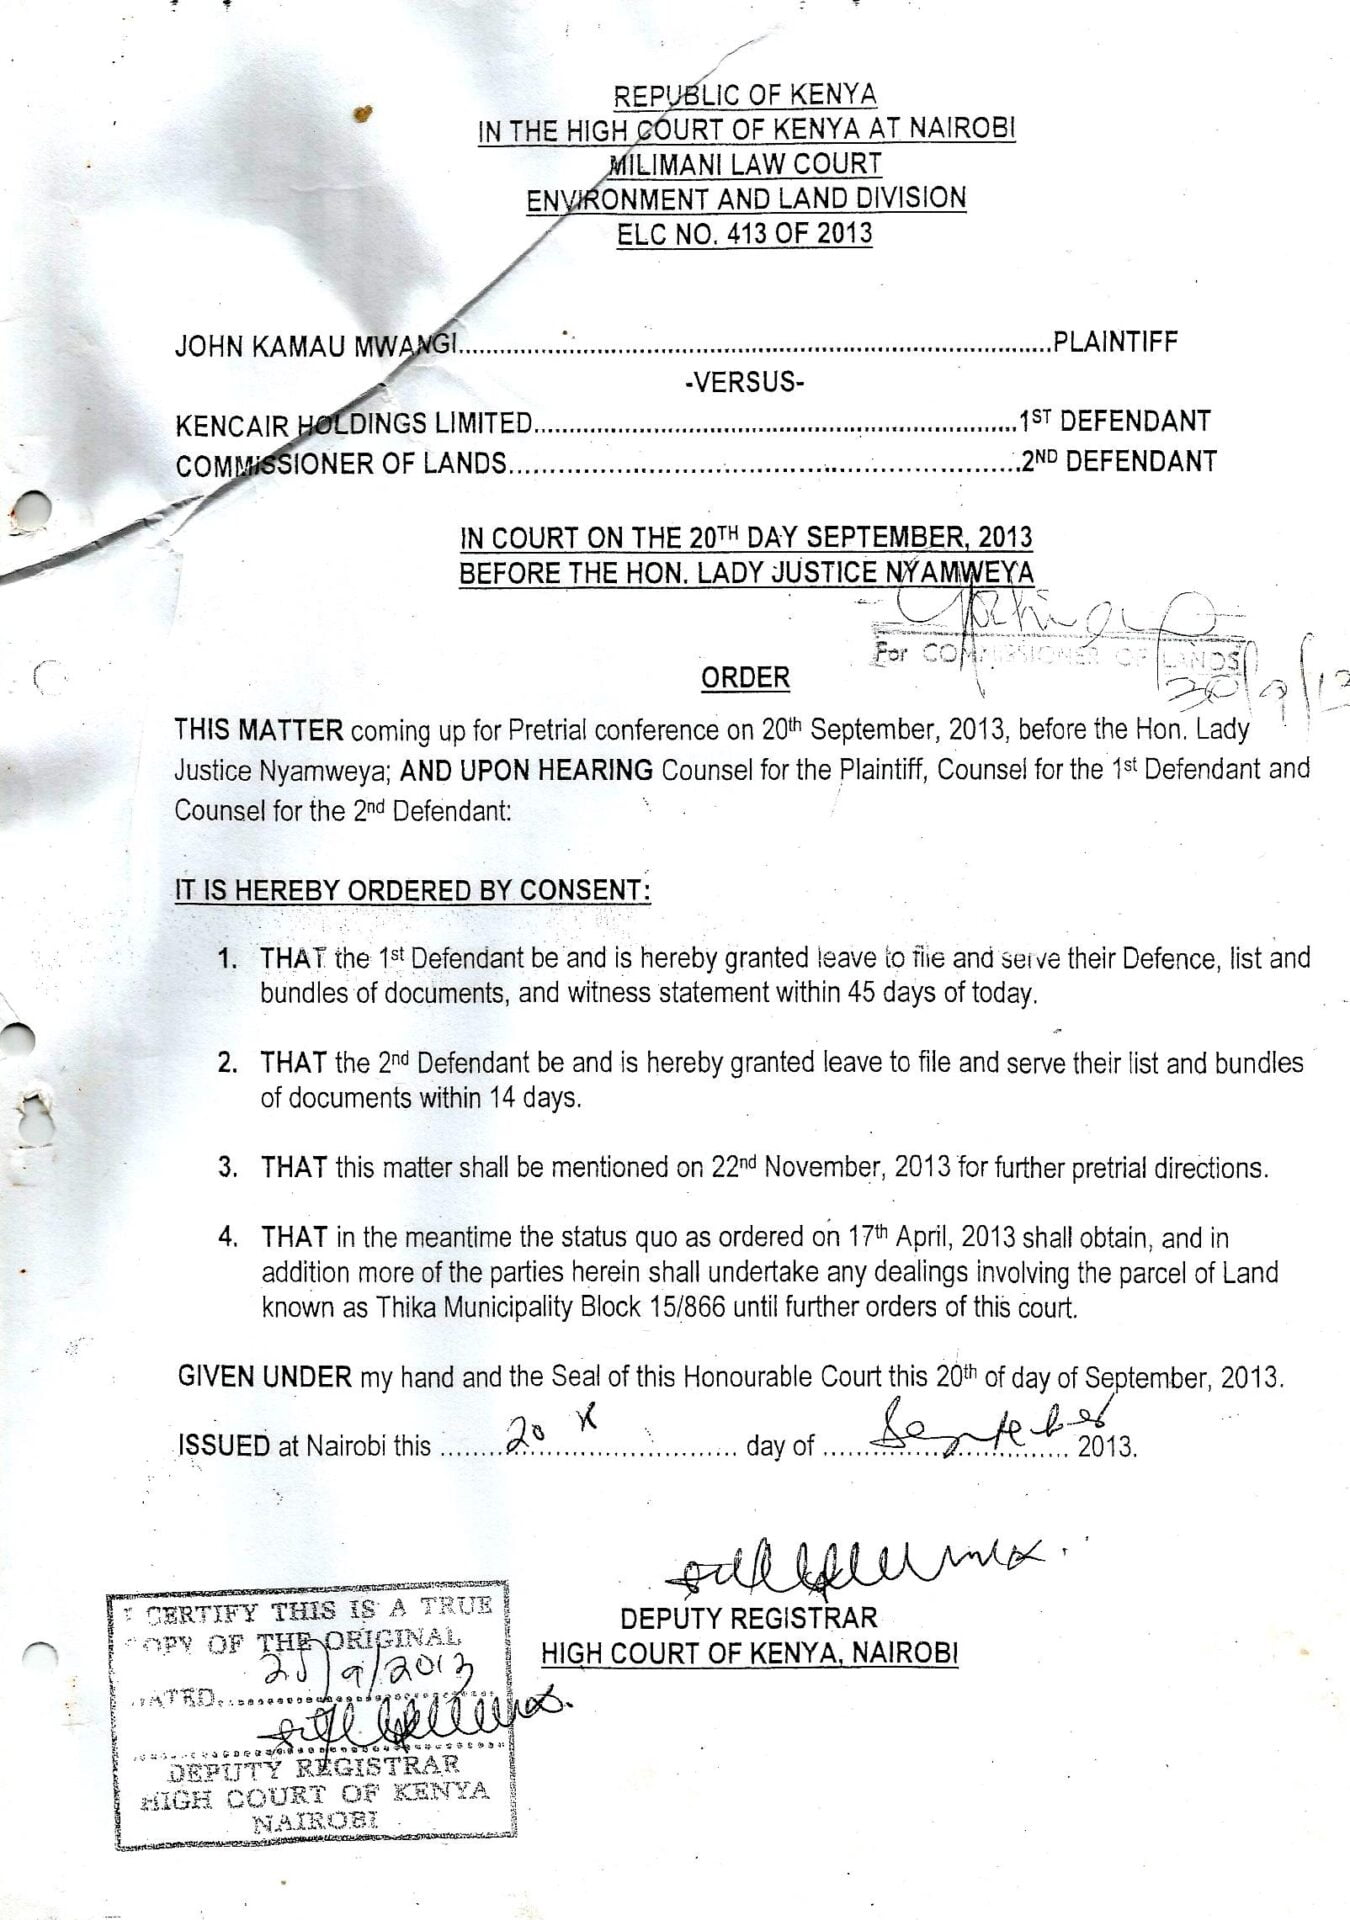 One of the orders issued by the High Court on the land